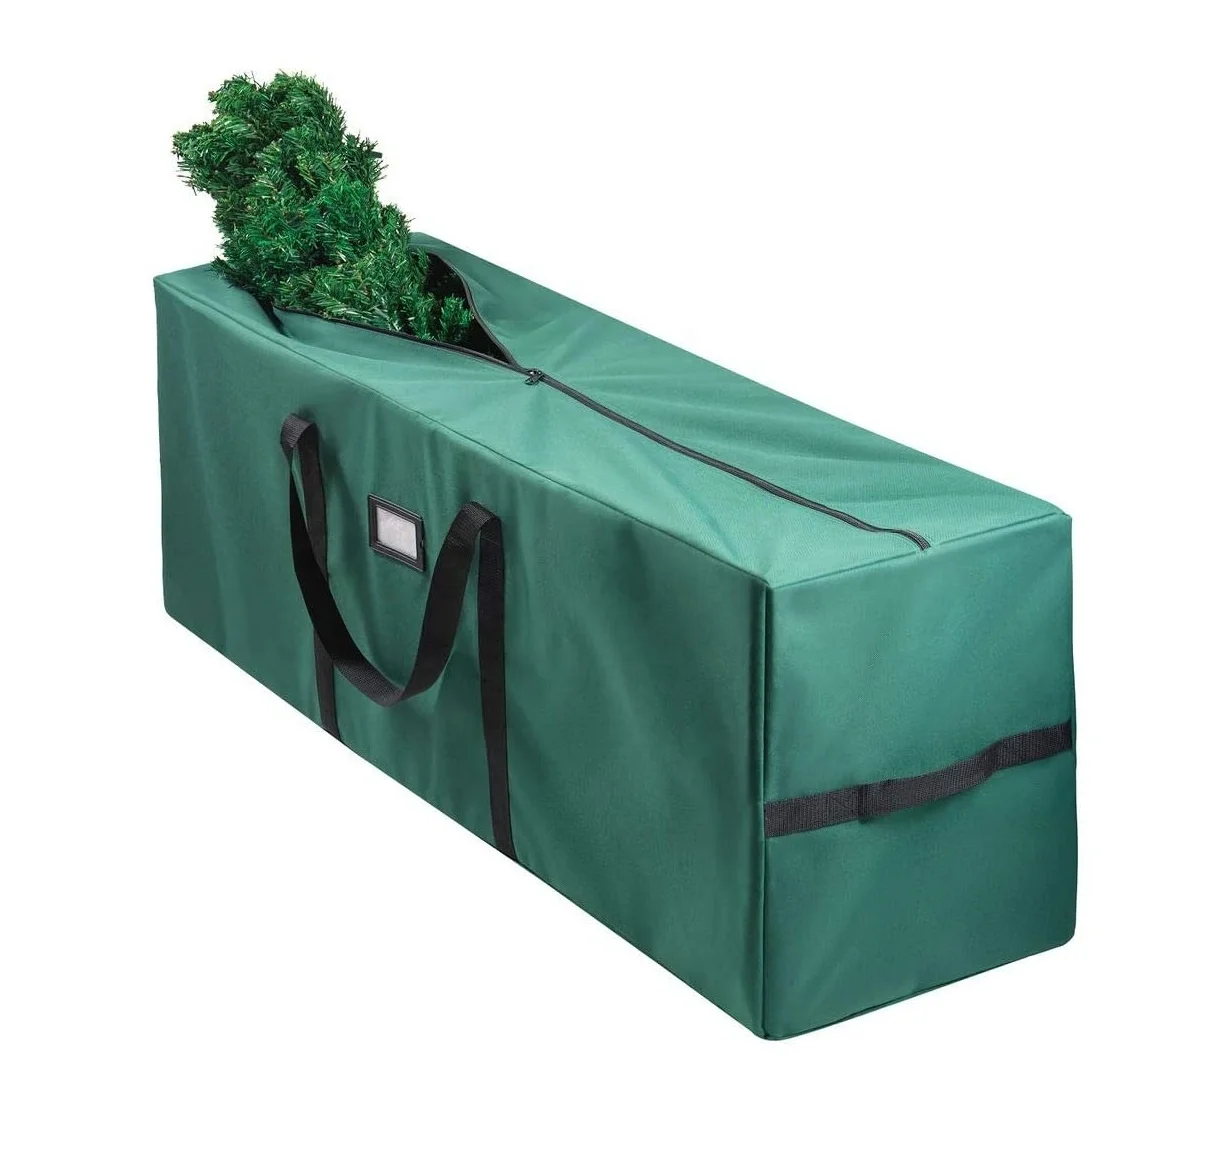 christmas tree bag for heavy christmas tree storage tote (CANVAS)fits 8 FT Artificial dissembled tree moving bags (1600372911730)